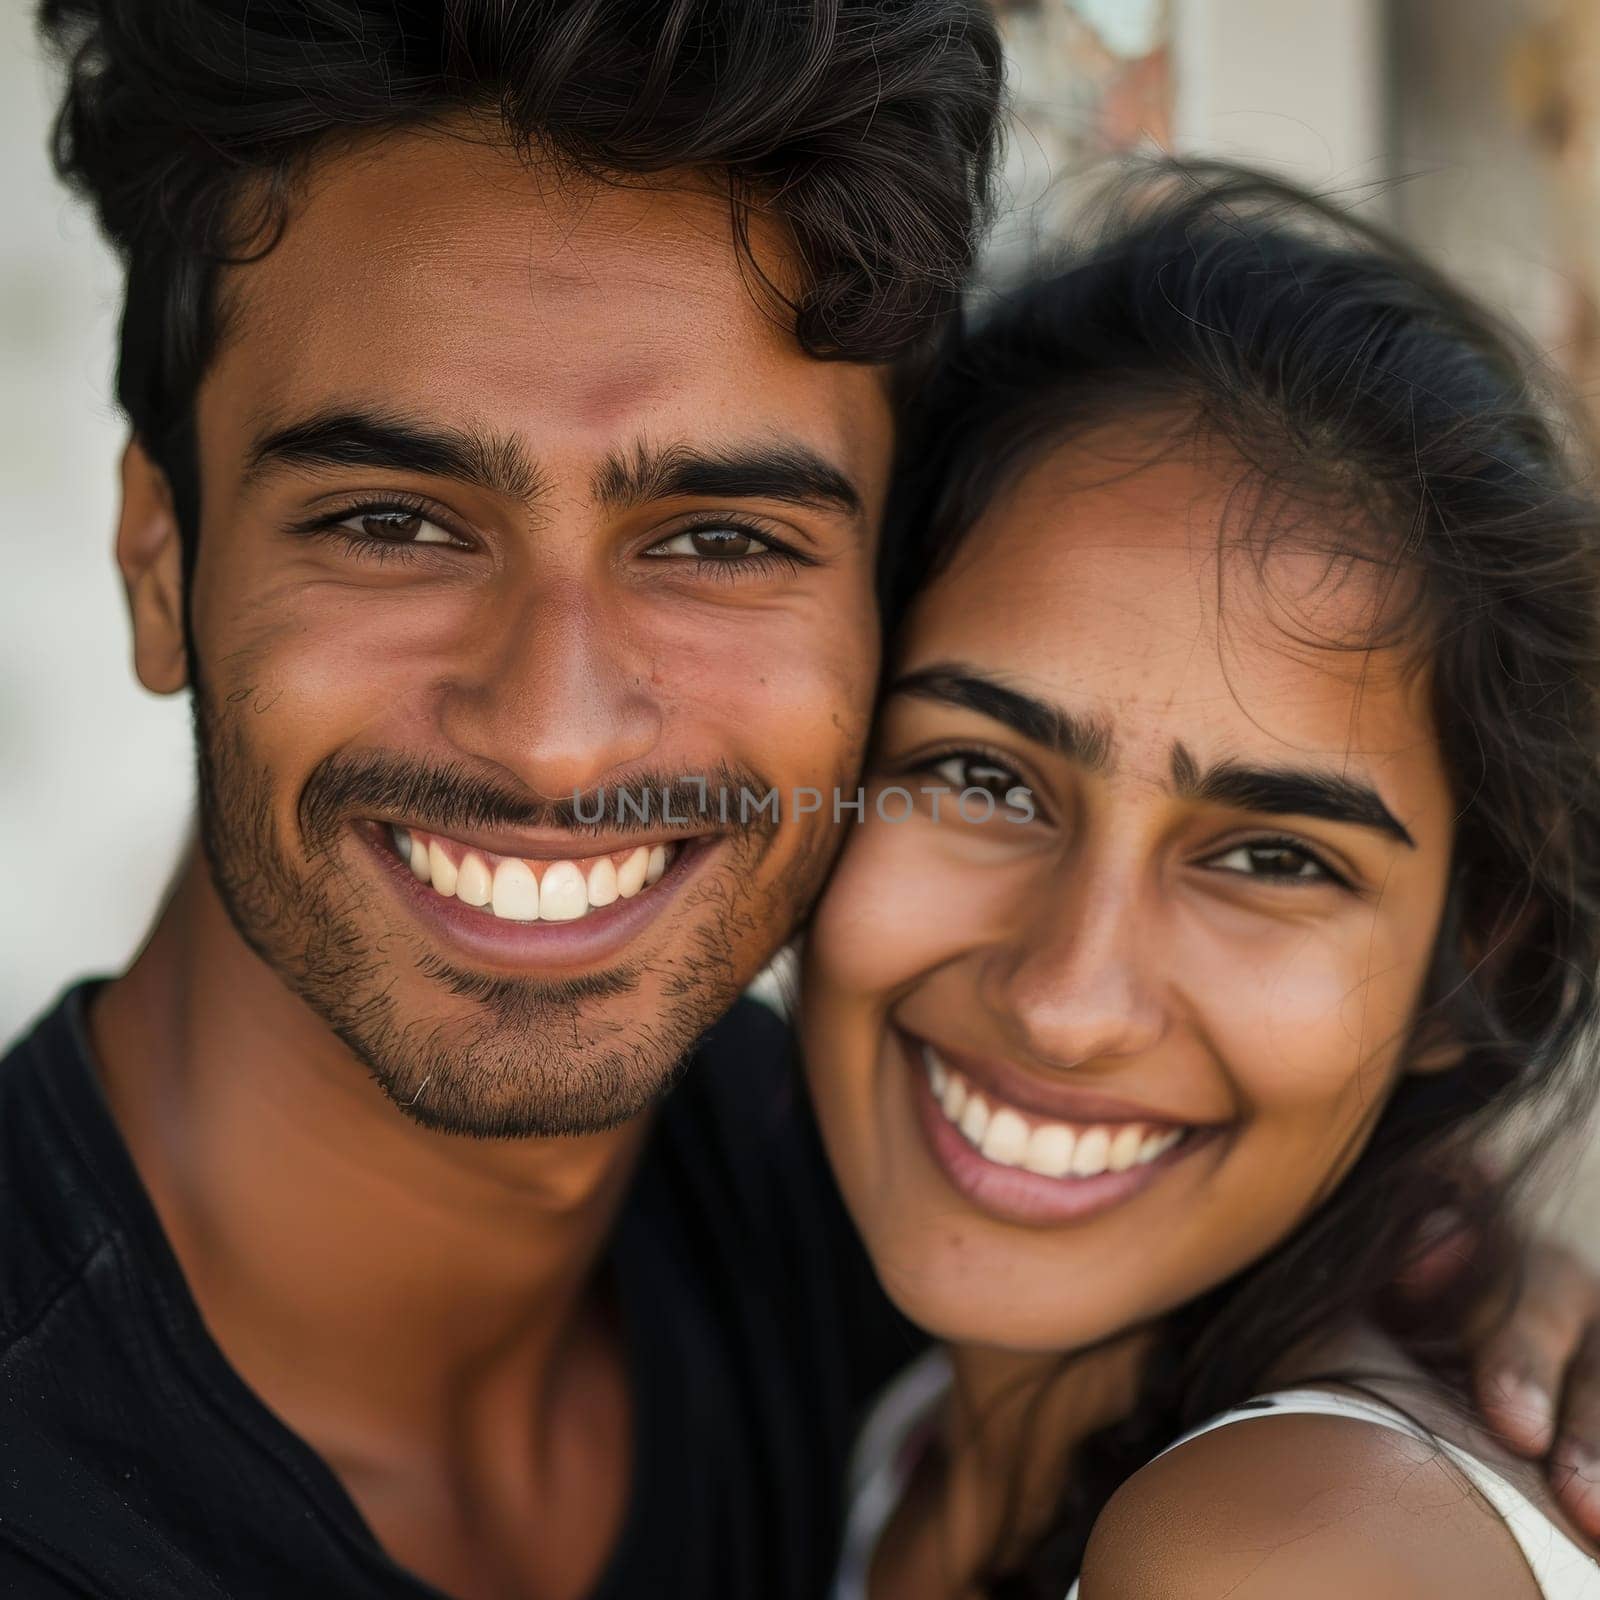 With beaming smiles and an affectionate embrace, this Indian couple exudes warmth and happiness in their close bond